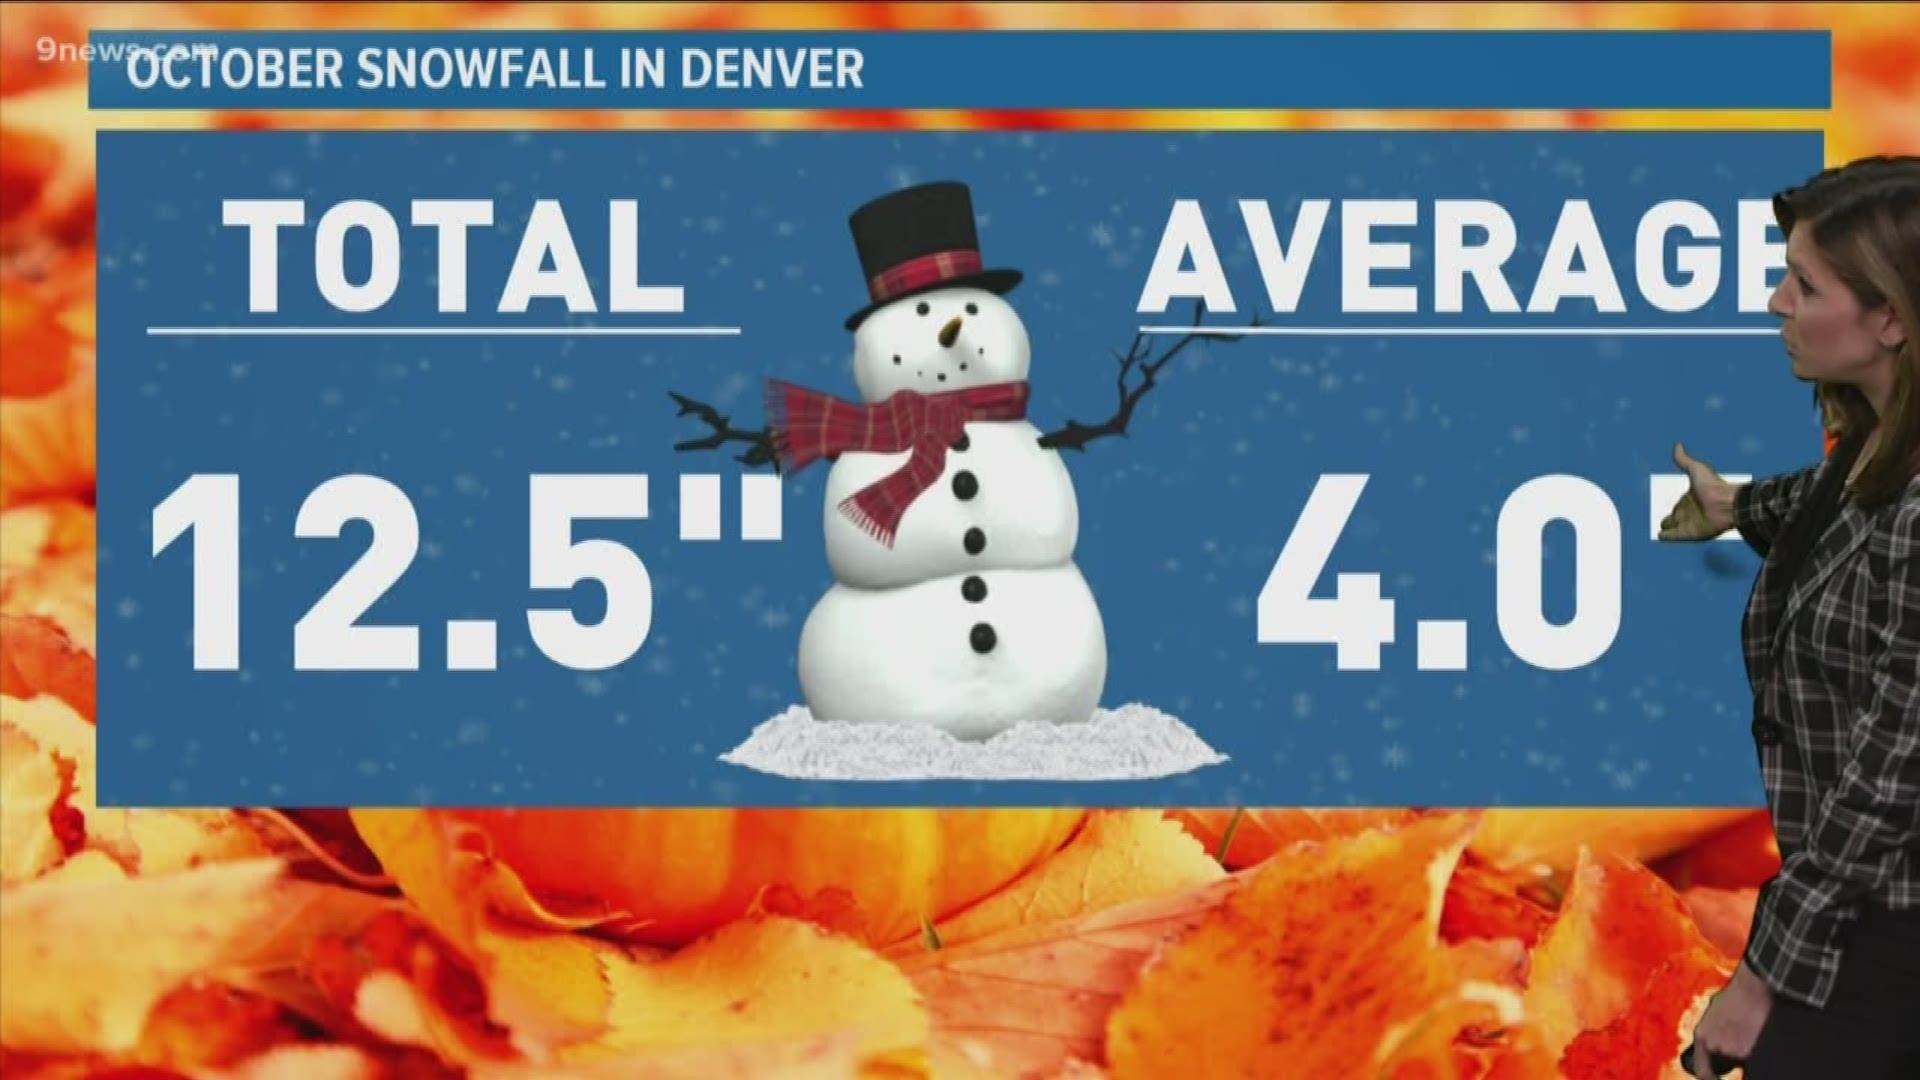 The state set several records for cold temperatures this month, ending October with an usual amount of snow.